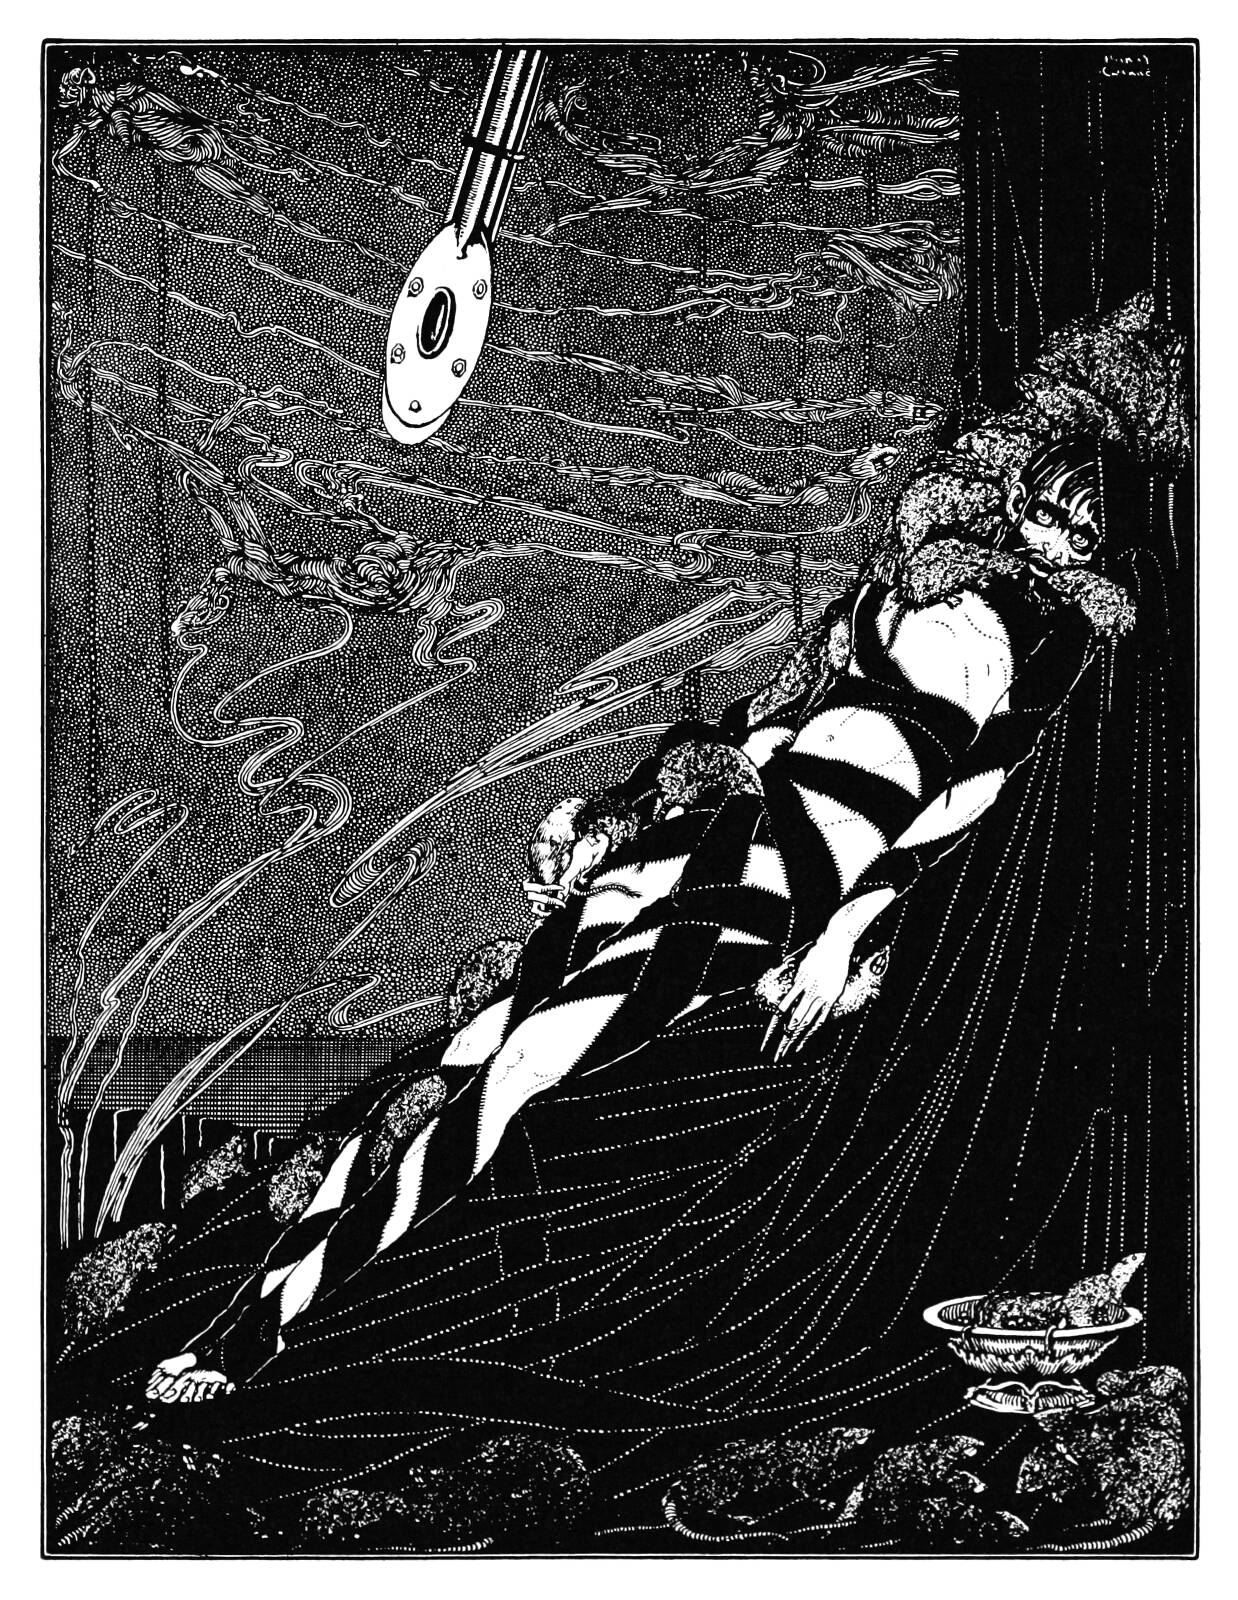 Harry Clarke, They Swarmed upon Me from Edgar Allan Poe, Tales of Mystery and Imagination, George G. Harrap and Co., London, 1919. Public Domain Review.